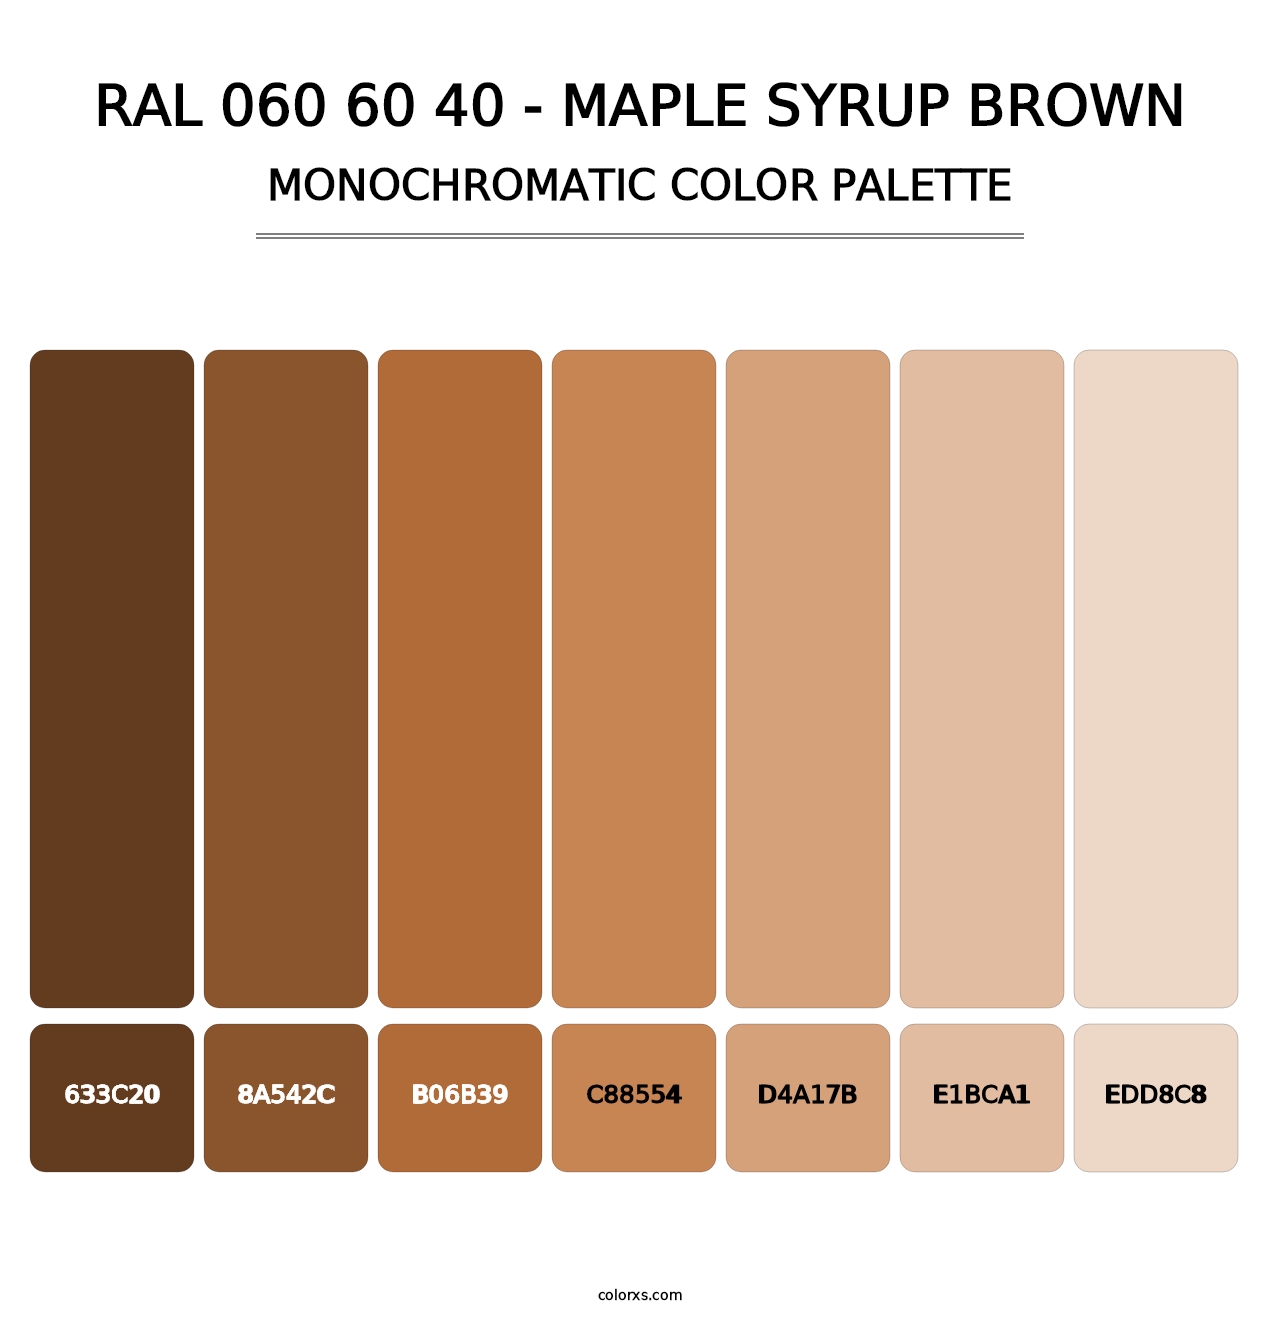 RAL 060 60 40 - Maple Syrup Brown - Monochromatic Color Palette